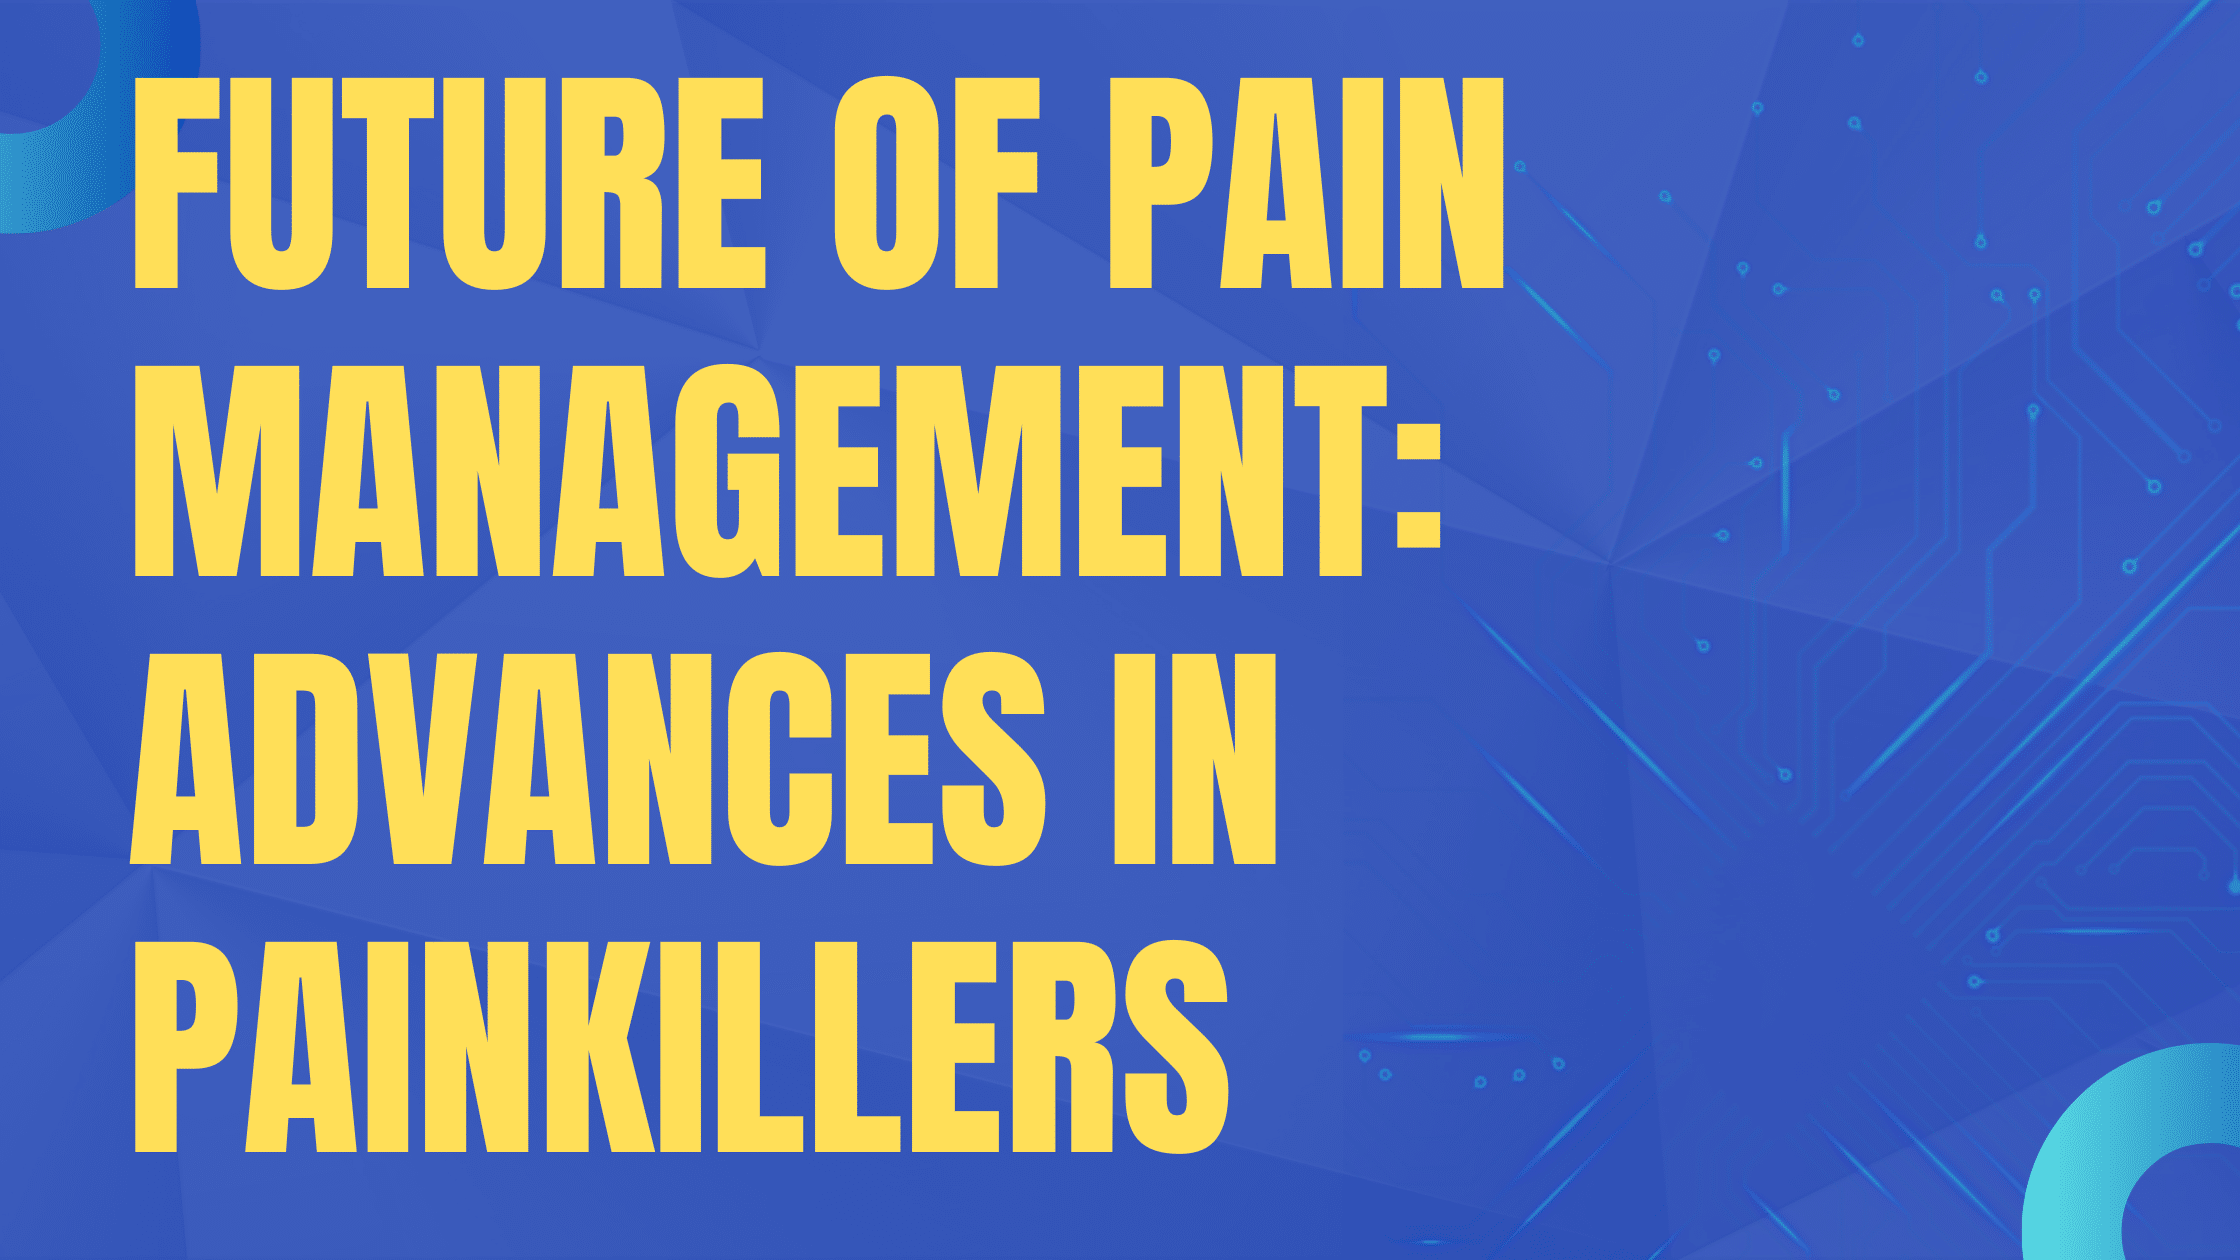 The Future of Pain Management: Advances in Painkillers